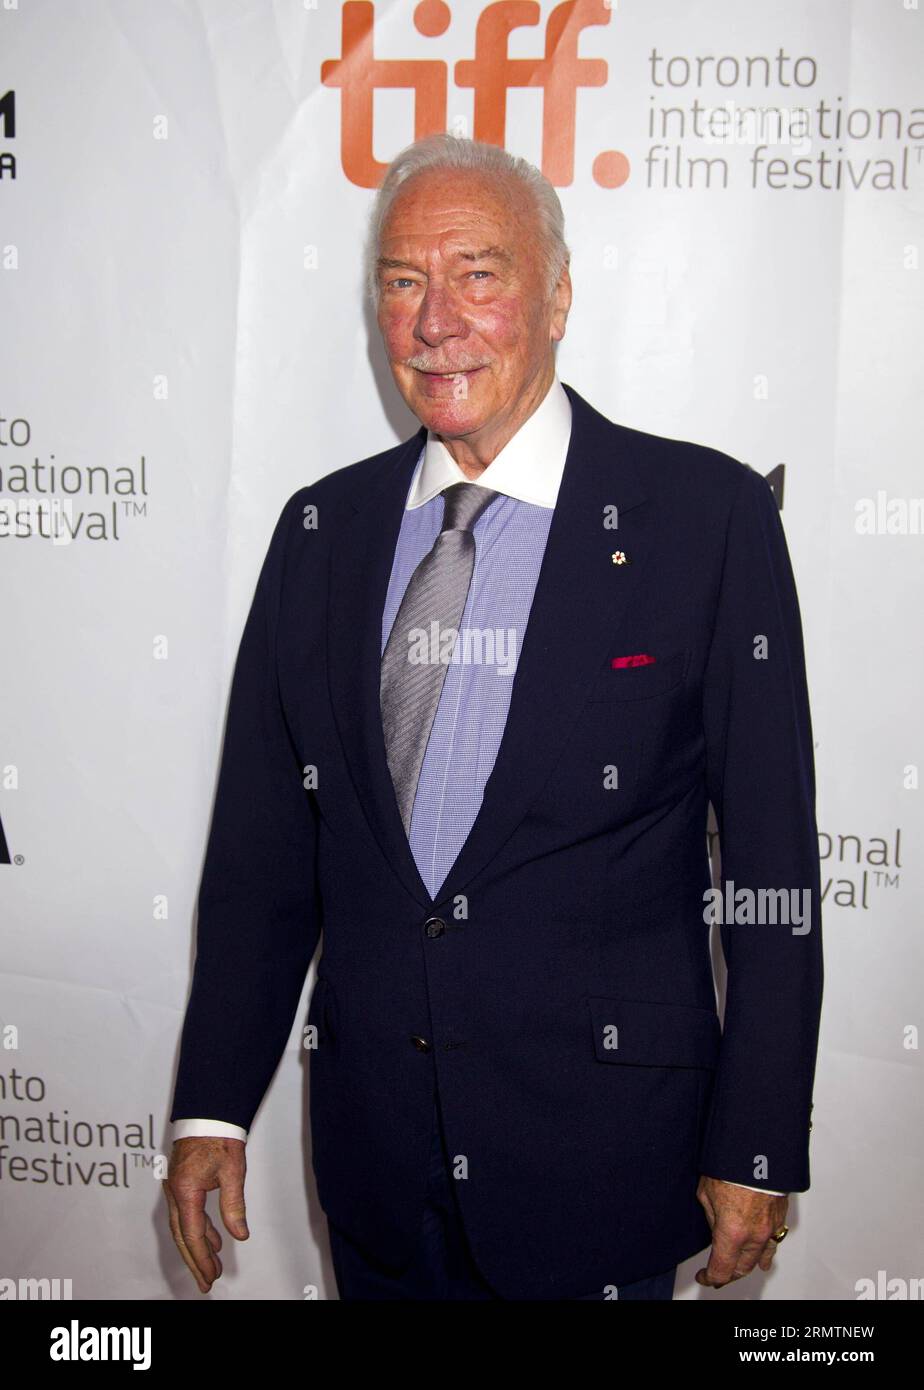 Actor Christopher Plummer poses for photos before the premiere of the film The Forger at Roy Thompson Hall during the 39th Toronto International Film Festival in Toronto, Canada, Sept. 12, 2014. ) CANADA-TORONTO-INTERNATIONAL FILM FESTIVAL-FILM THE FORGER ZouxZheng PUBLICATIONxNOTxINxCHN   Actor Christopher Plummer Poses for Photos Before The Premiere of The Film The forger AT Roy Thompson Hall during The 39th Toronto International Film Festival in Toronto Canada Sept 12 2014 Canada Toronto International Film Festival Film The forger  PUBLICATIONxNOTxINxCHN Stock Photo